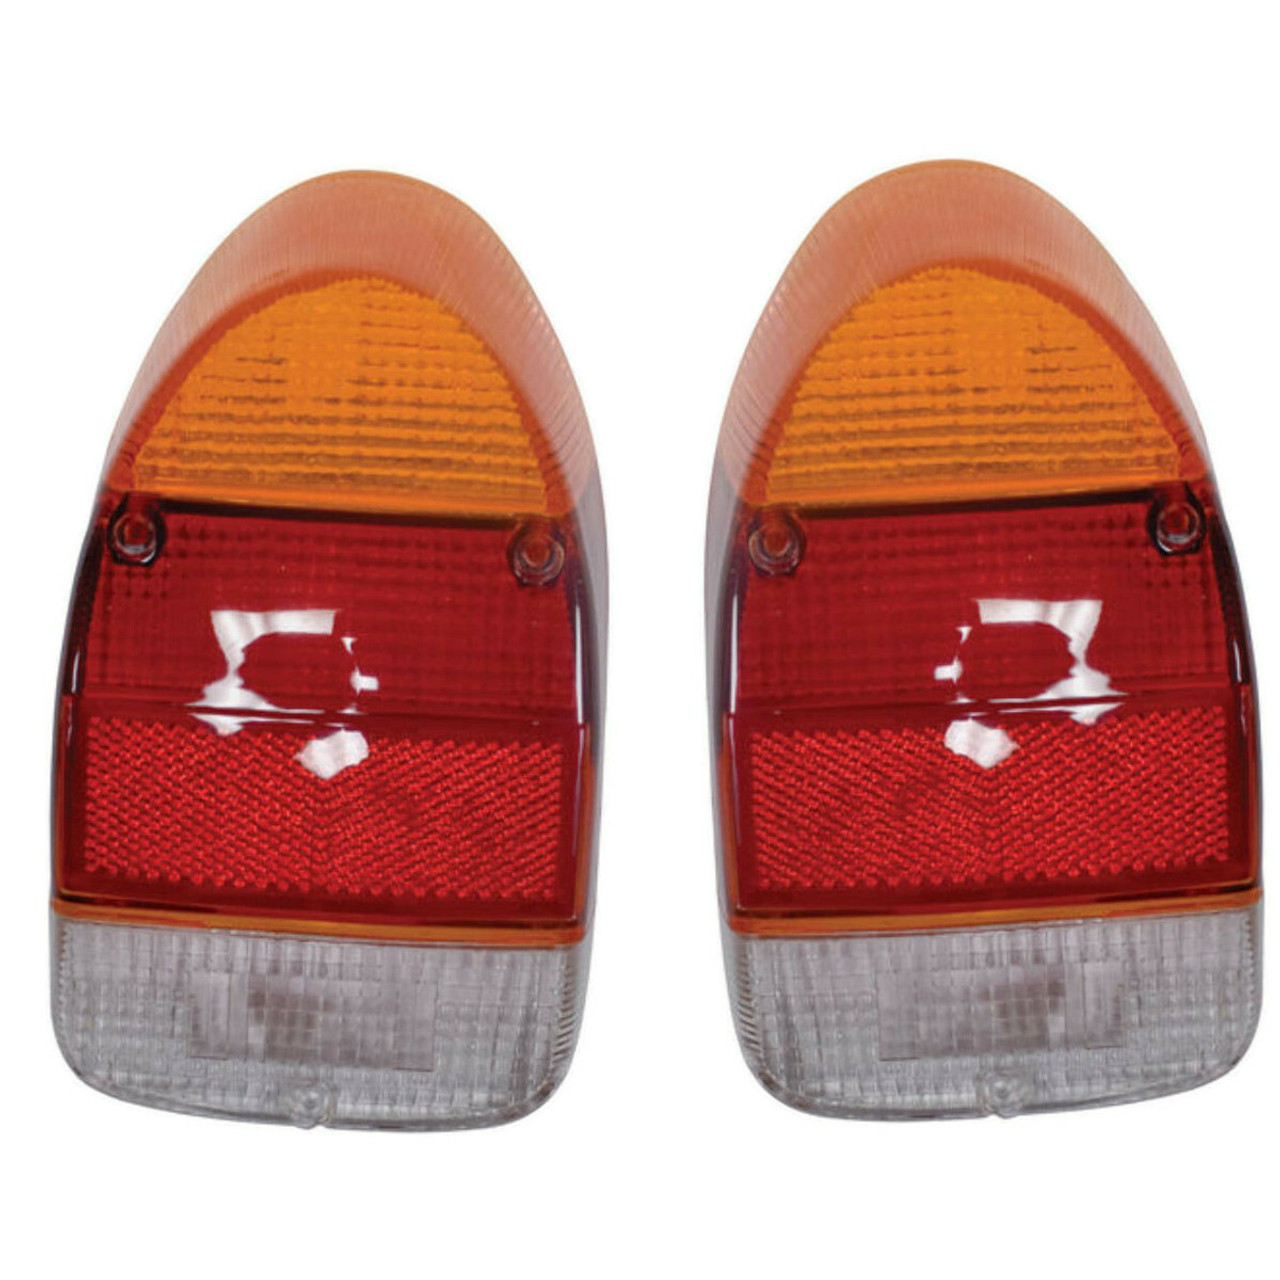 Euro Style Tail Light Lenses for VW Beetle/Bug 1971-1972, Amber/Red/White, Pair by EMPI